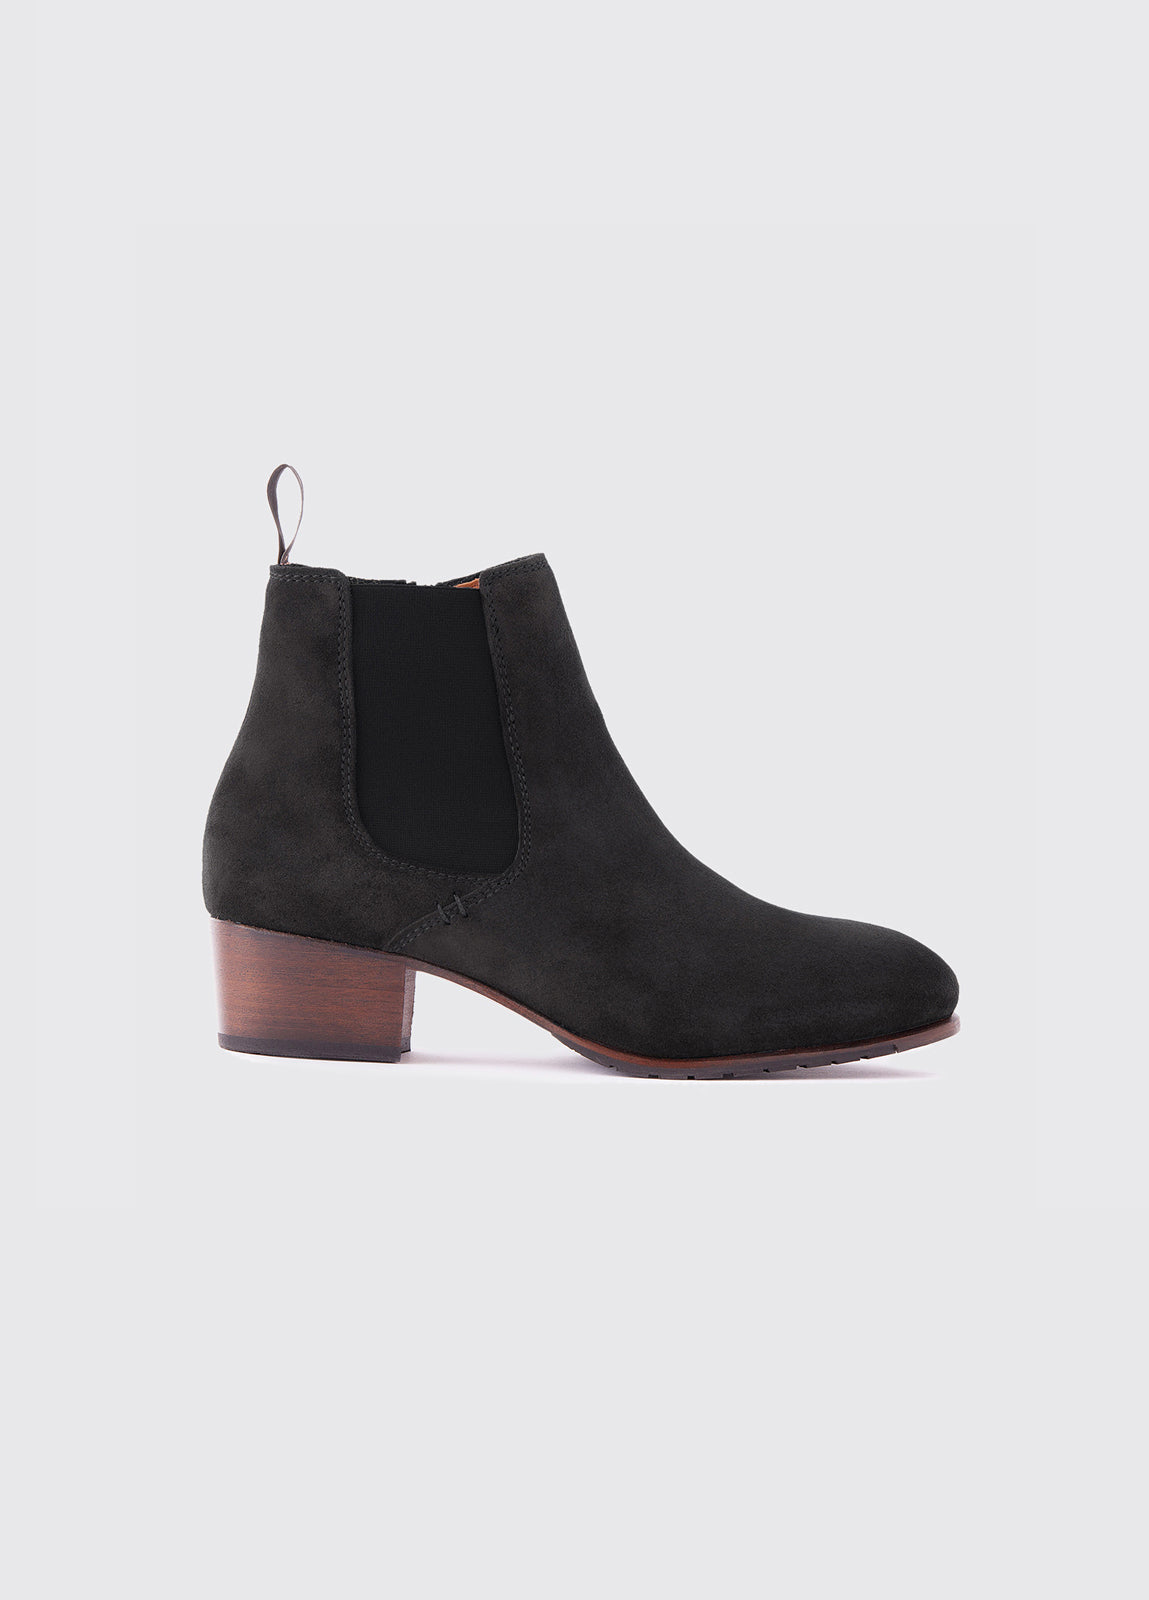 Dubarry Bray Chelsea Boot - Black Suede